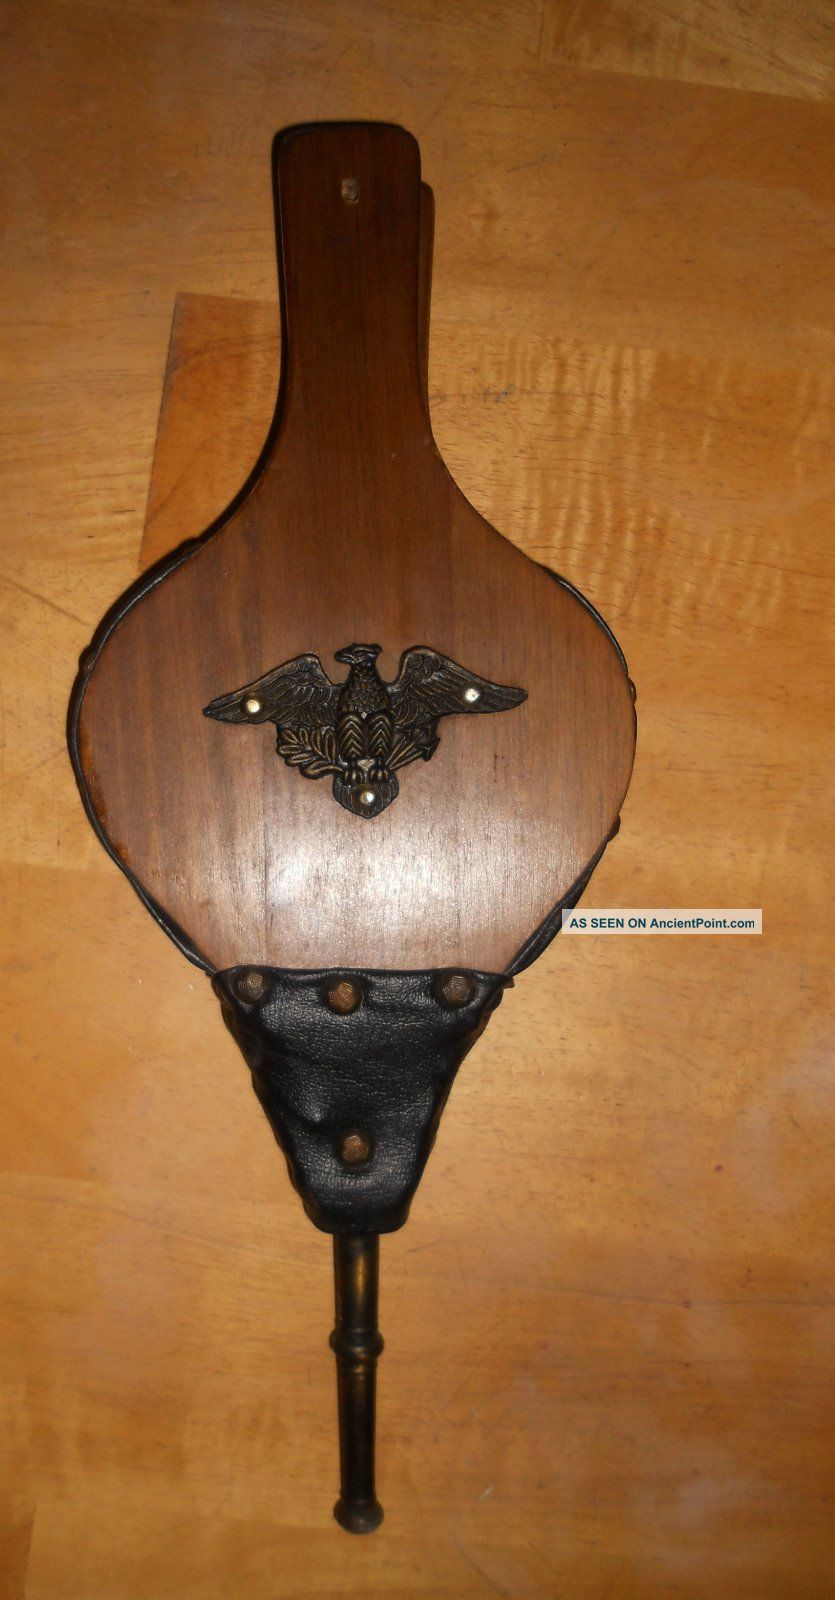 Vintage Fireplace Bellows W/eagle Crest Hearth Woodstove Tool Wood & Leather - Vgc Hearth Ware photo